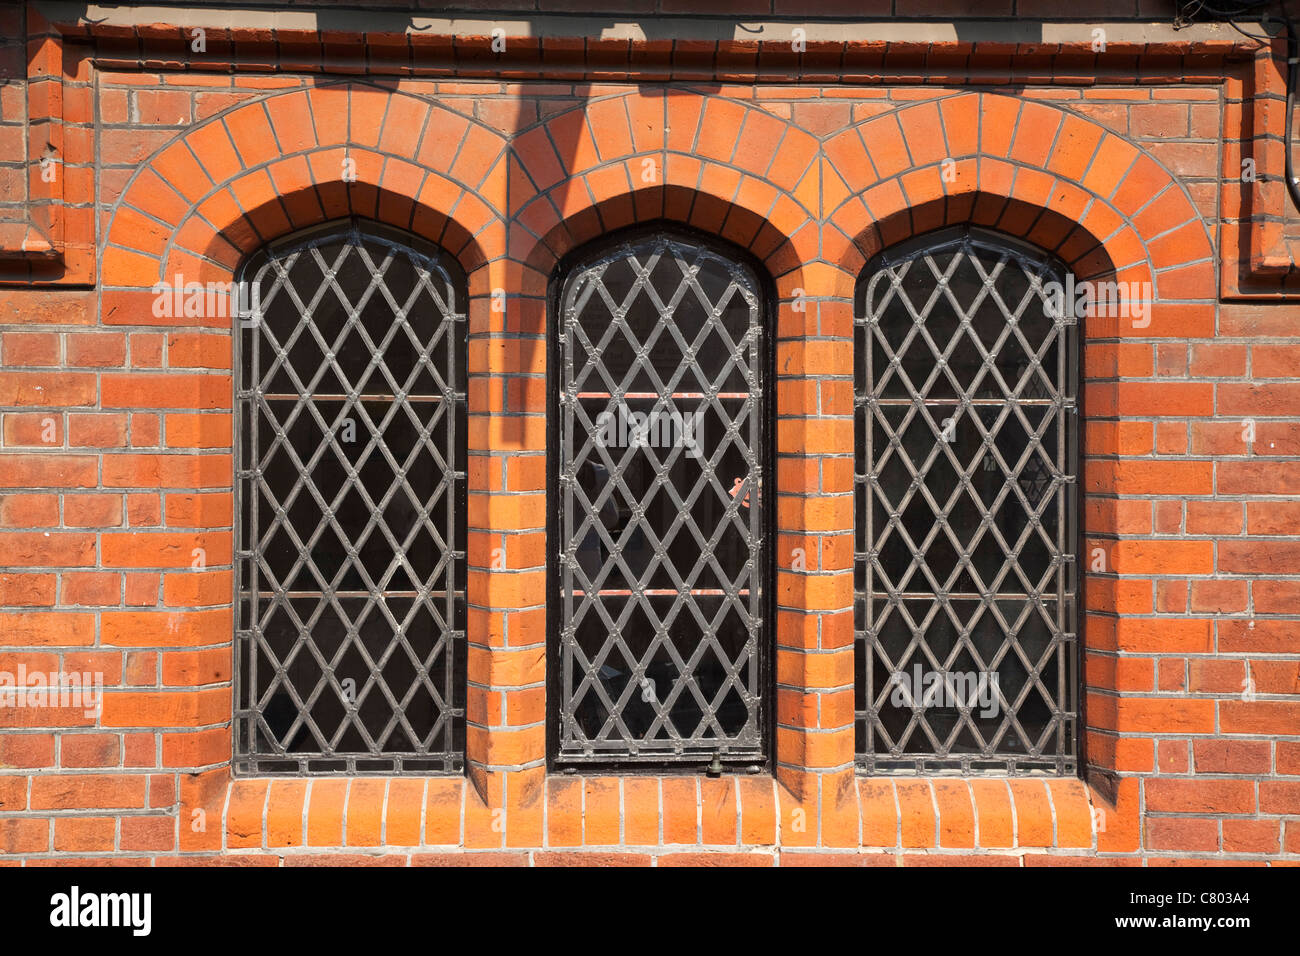 England, West Sussex, Arundel, detail of red brick building with lead light windows. Stock Photo